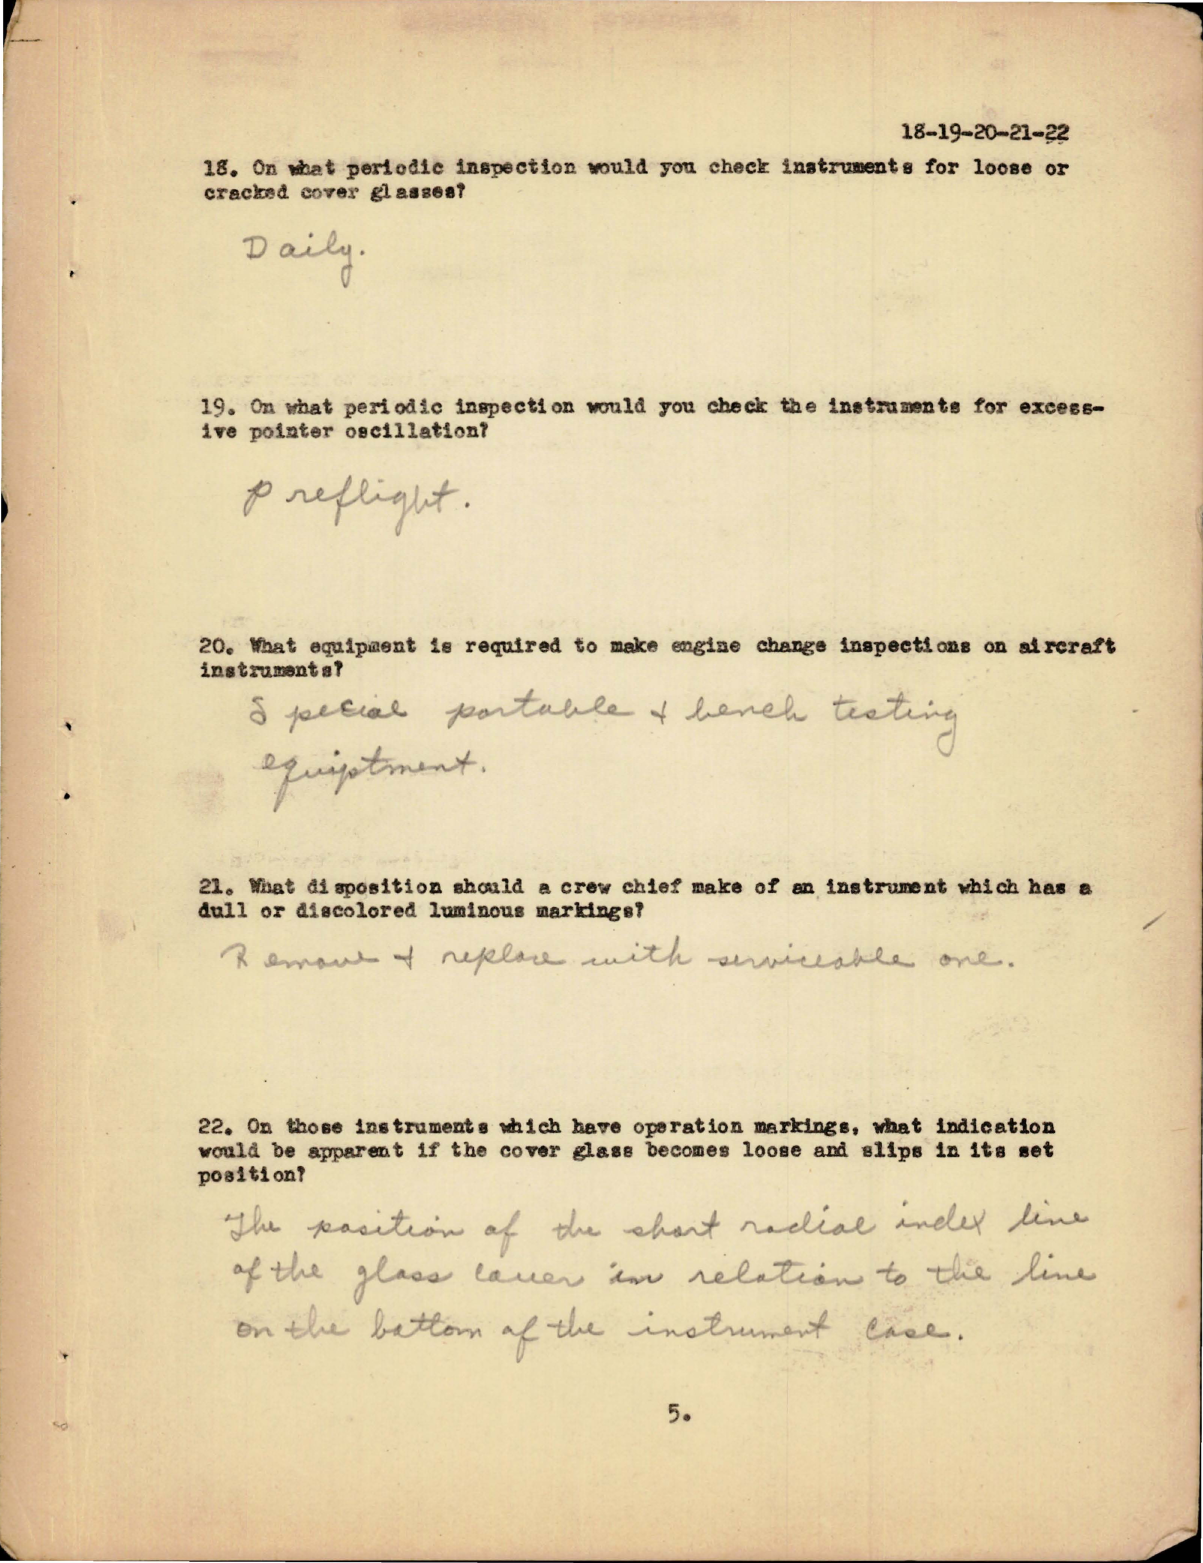 Sample page 5 from AirCorps Library document: Study Assignment & Questionnaire for Aircraft Instruments